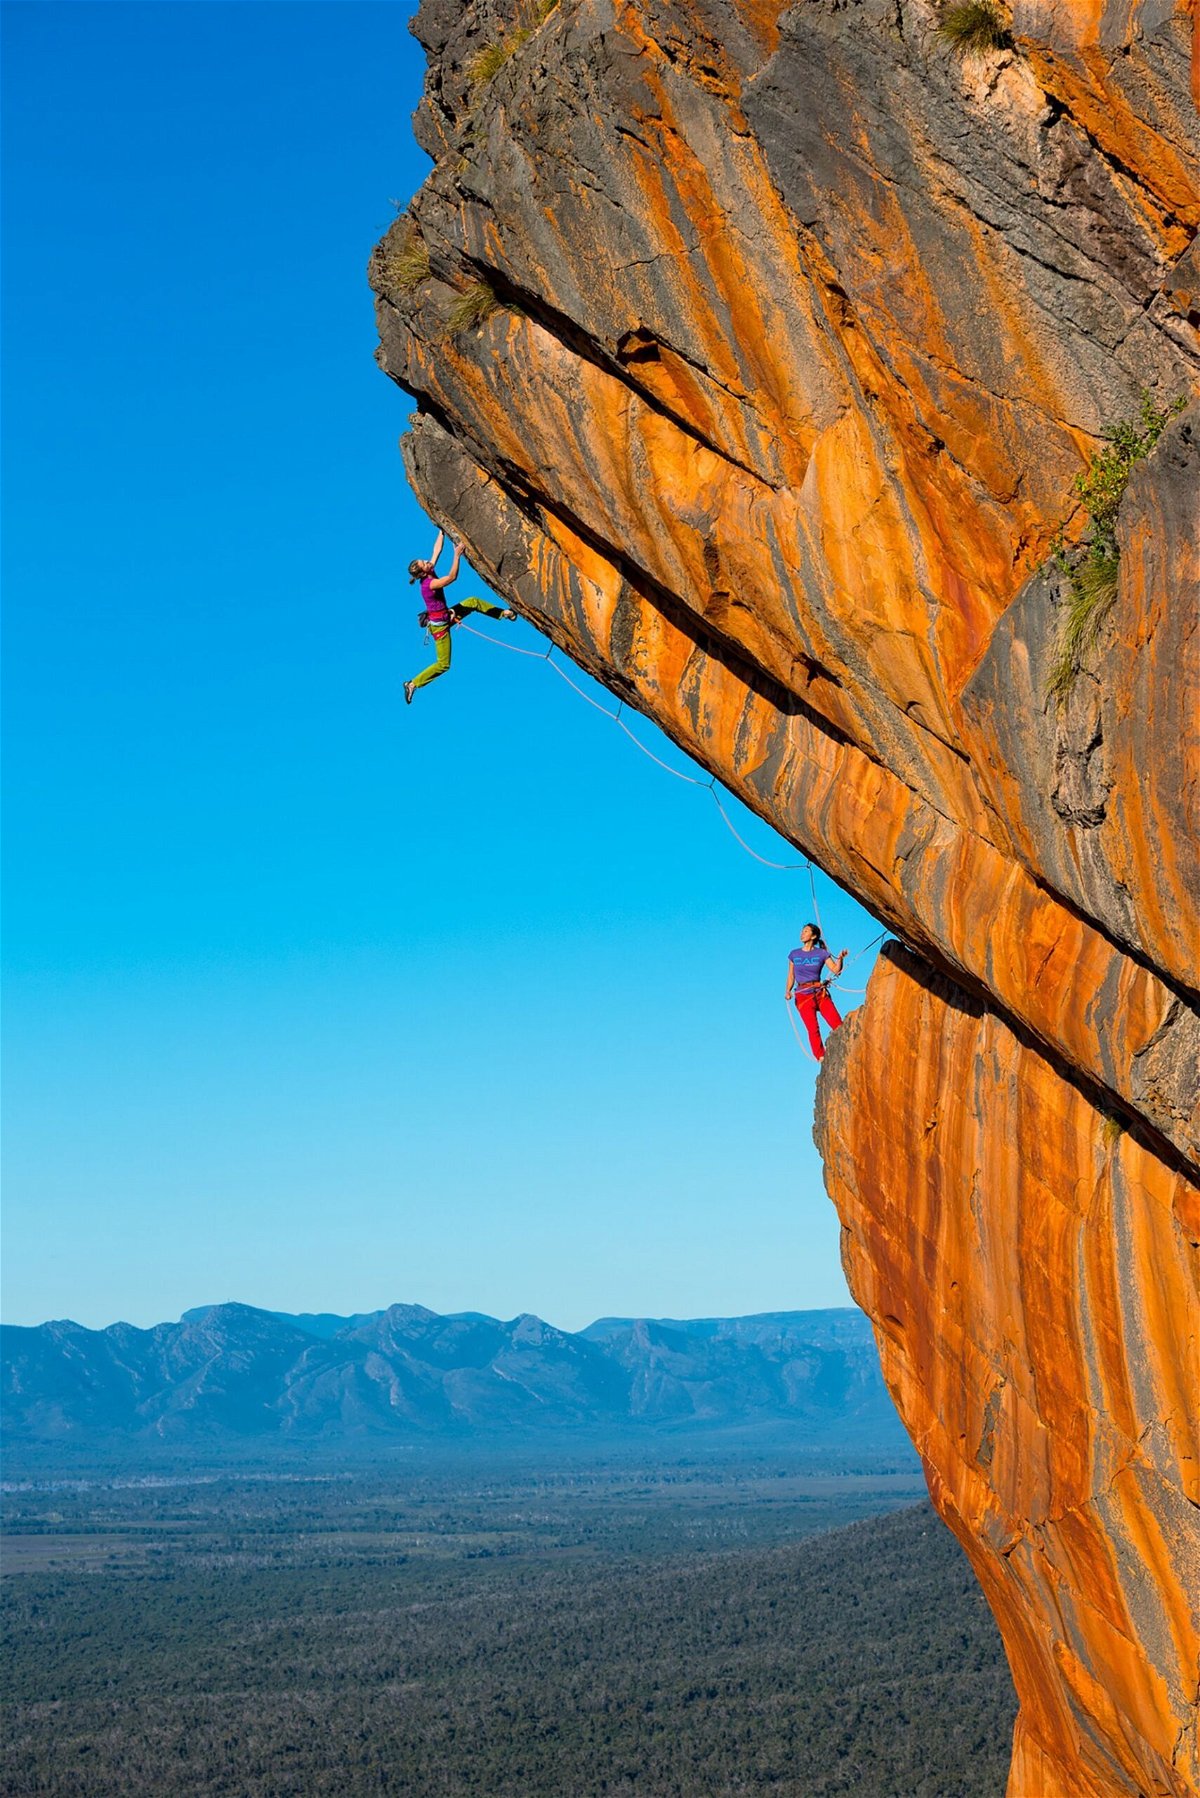 <i>Simon Carter via CNN Newsource</i><br/>Climbers (left to right) Ashlee Hendy and Elizabeth Chong photographed by Carter at Australia's Grampians National Park.